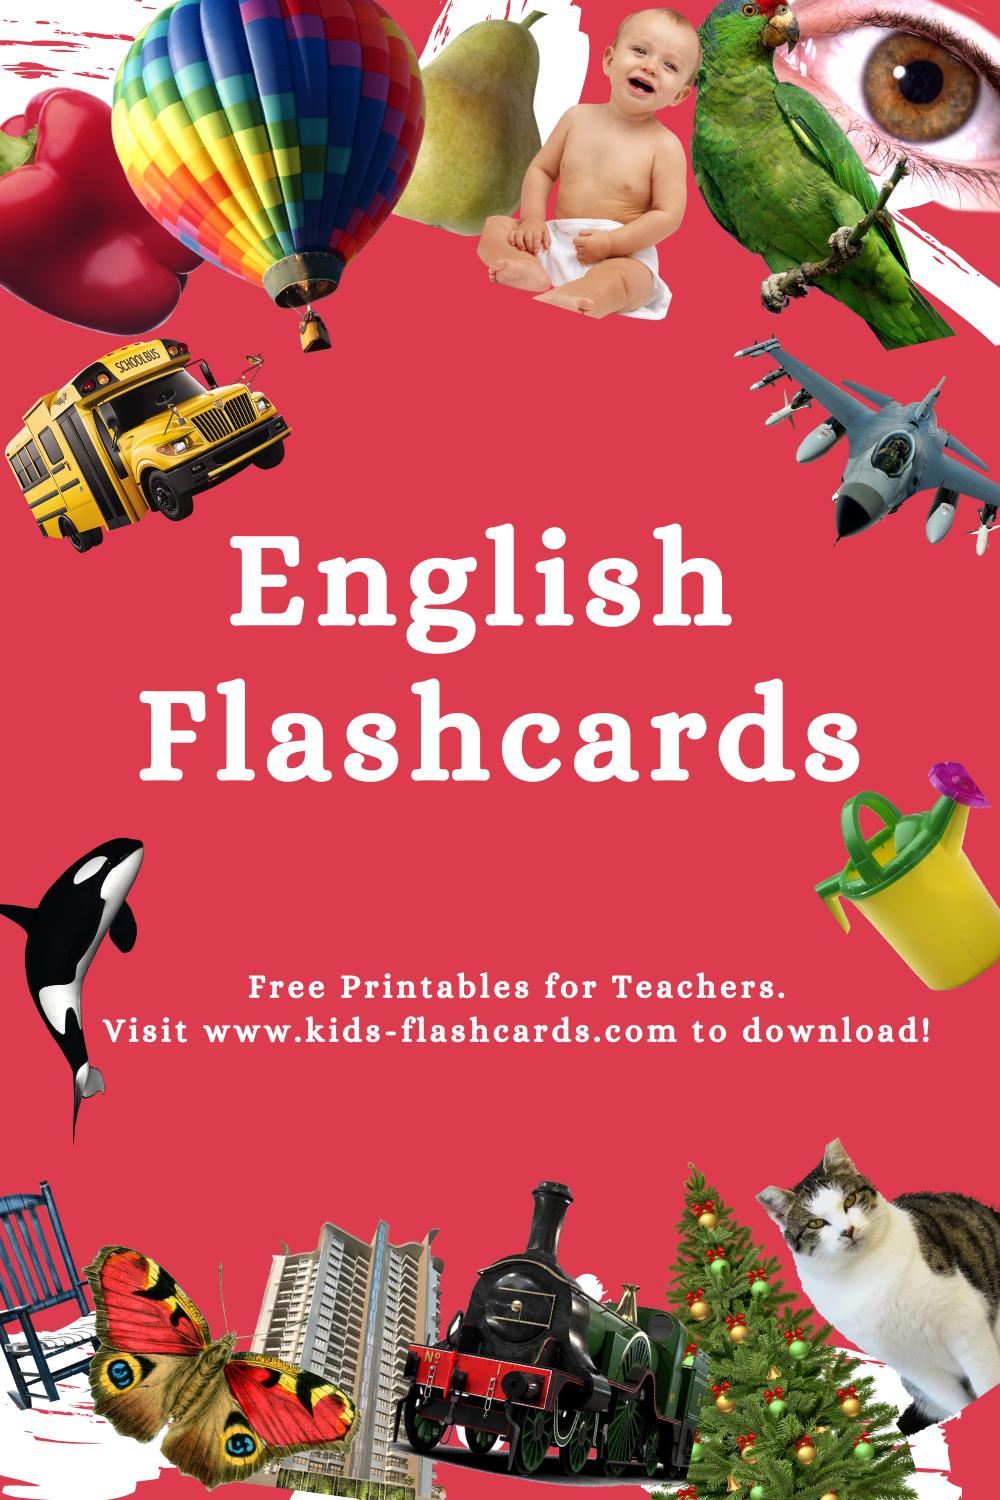 Worksheets to learn English language